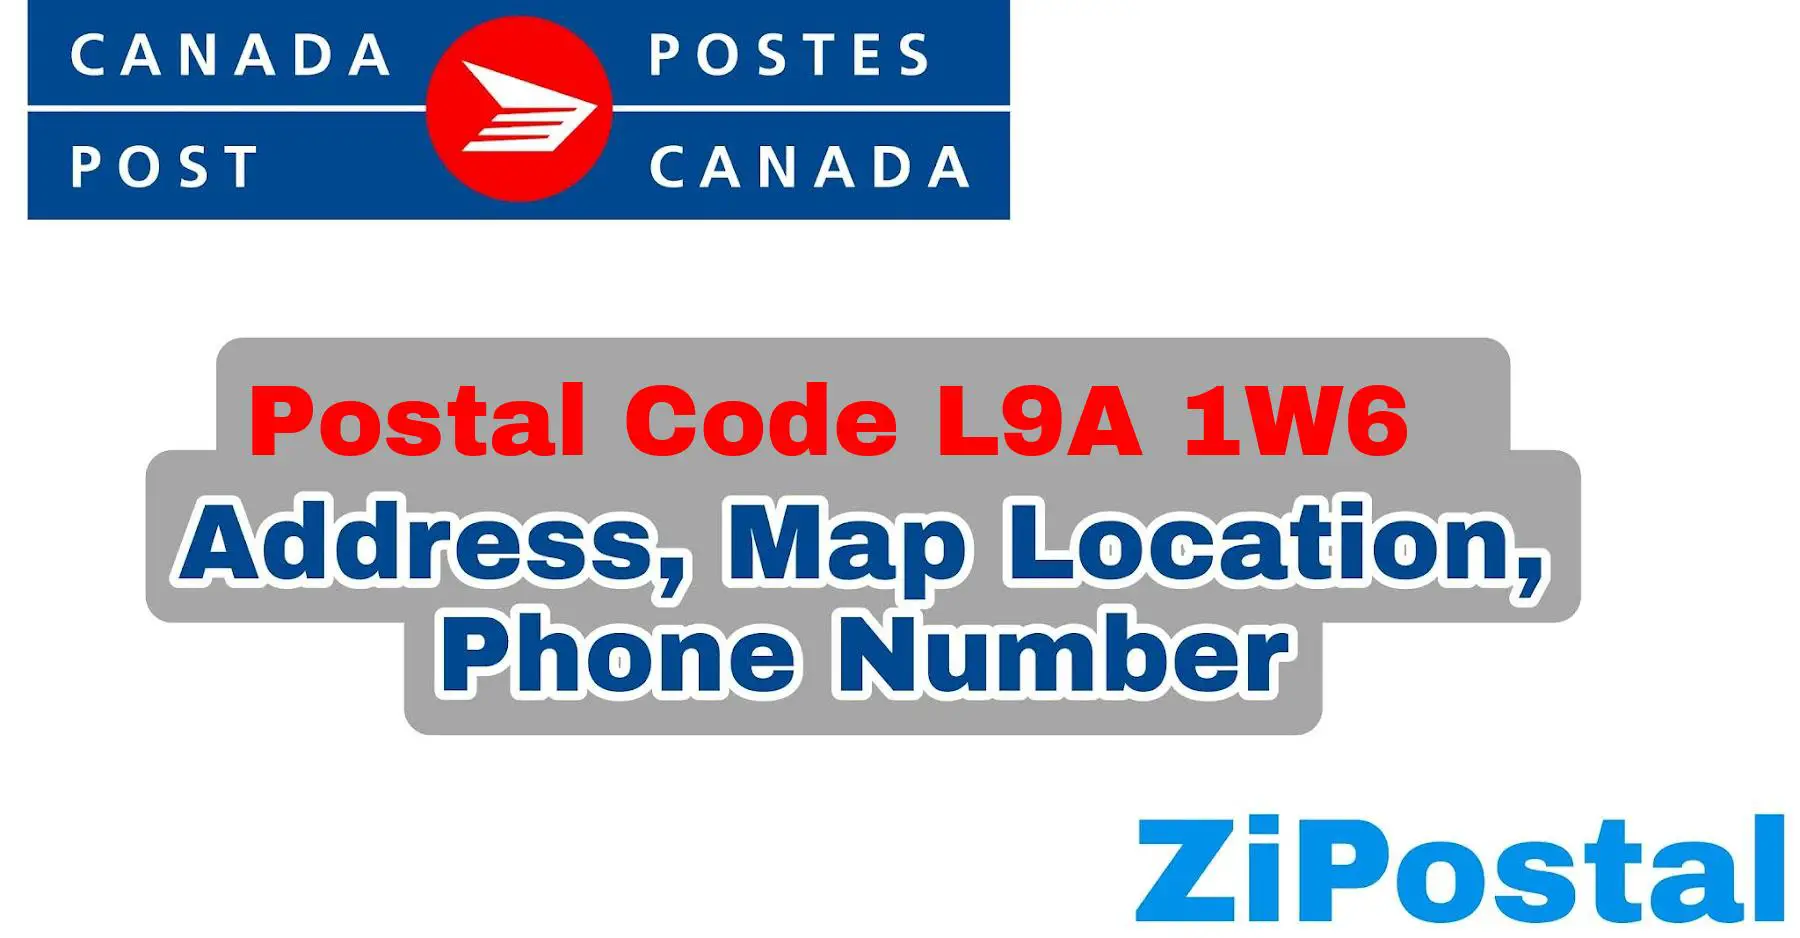 Postal Code L9A 1W6 Address Map Location and Phone Number